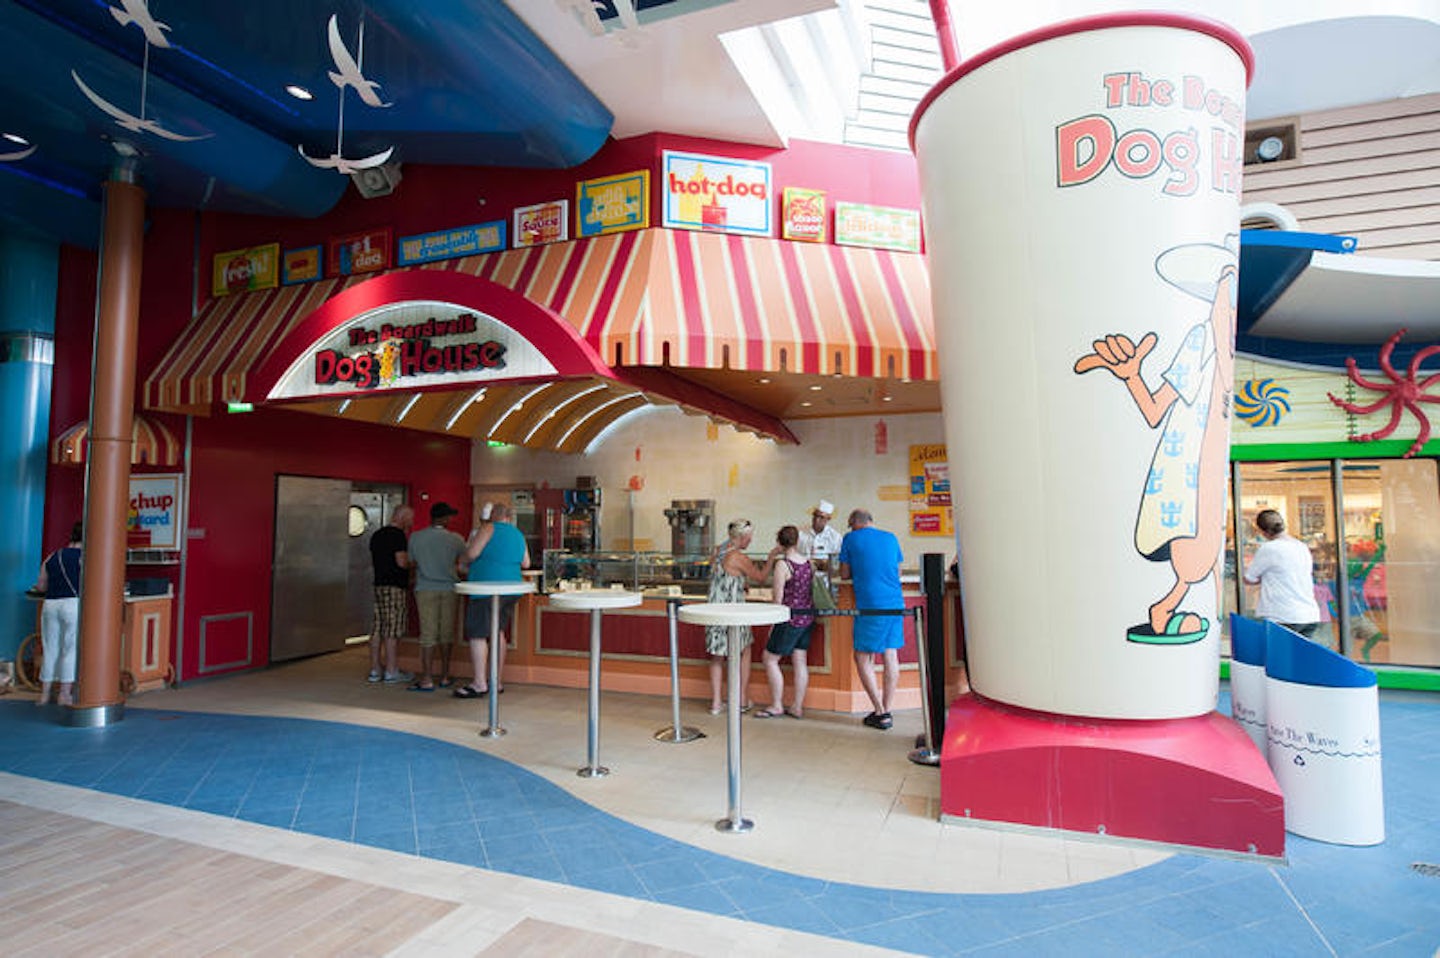 The Boardwalk Dog House on Allure of the Seas